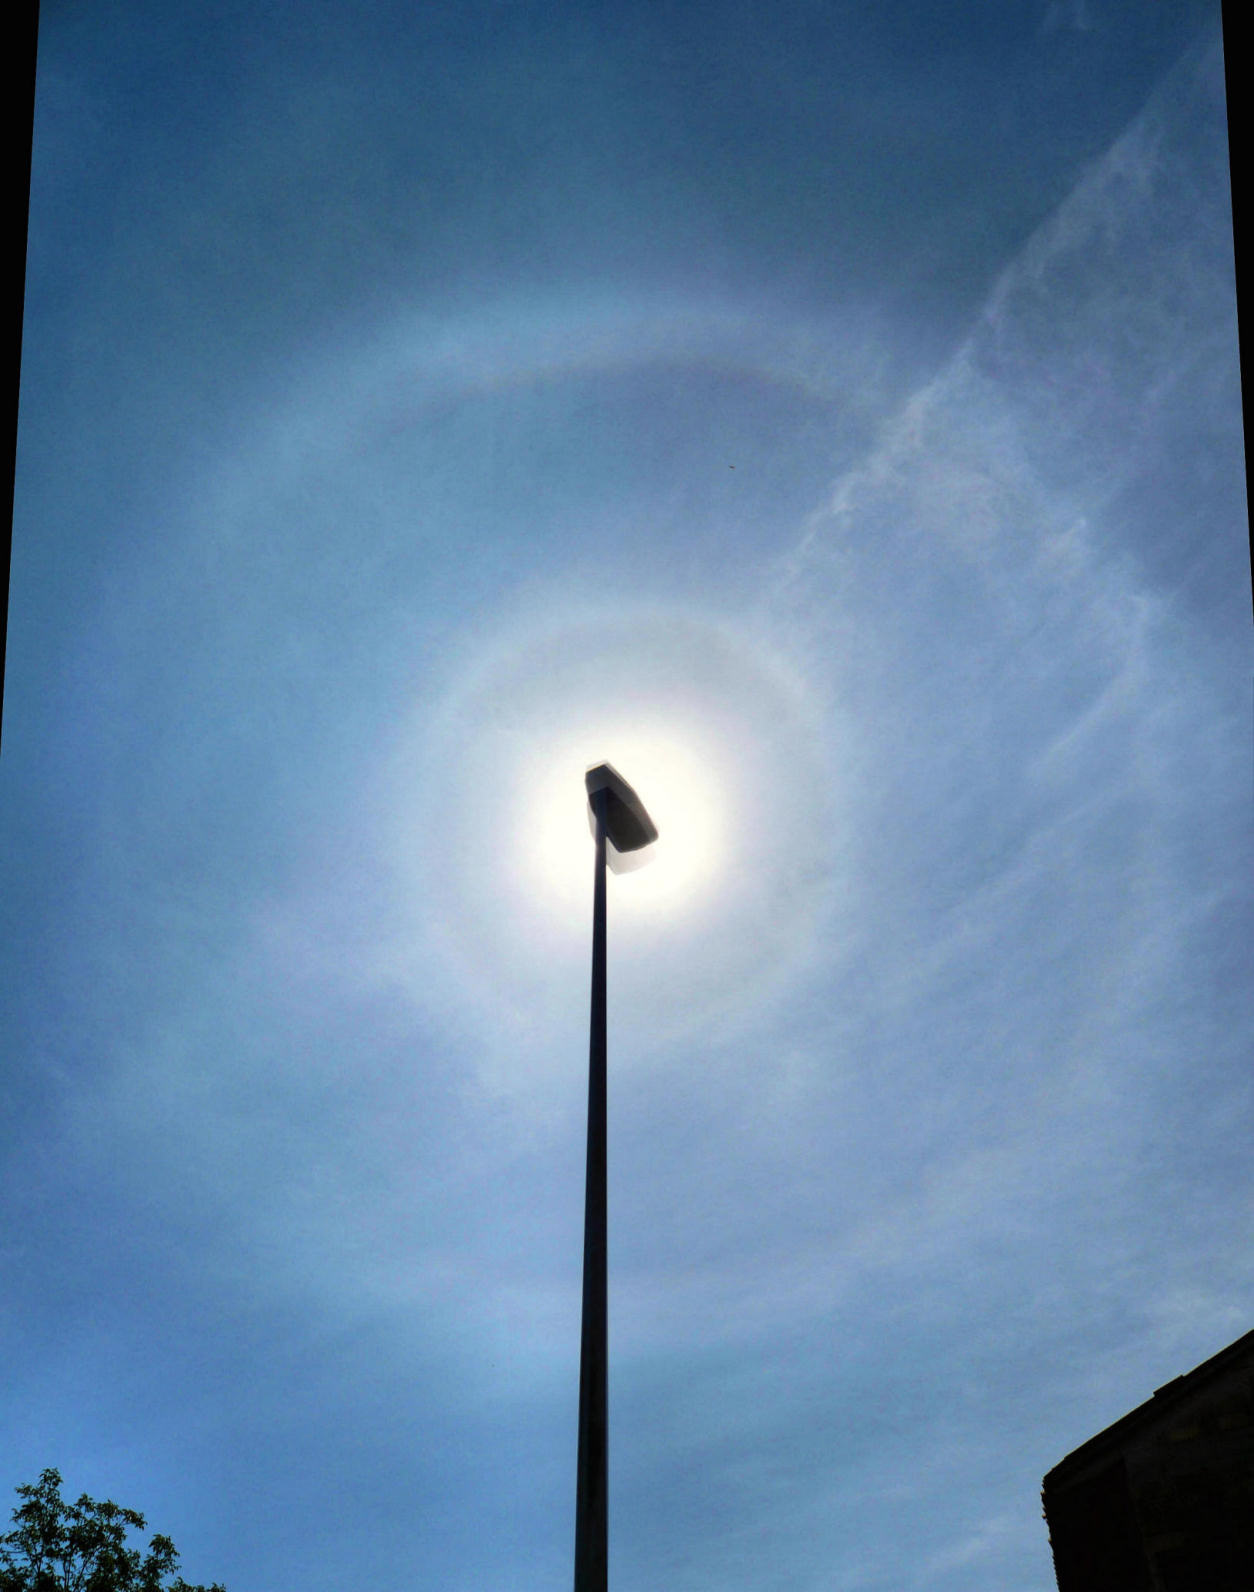 Solar Halos: 154 KB; click on the image to enlarge at 1254x1592 pixels